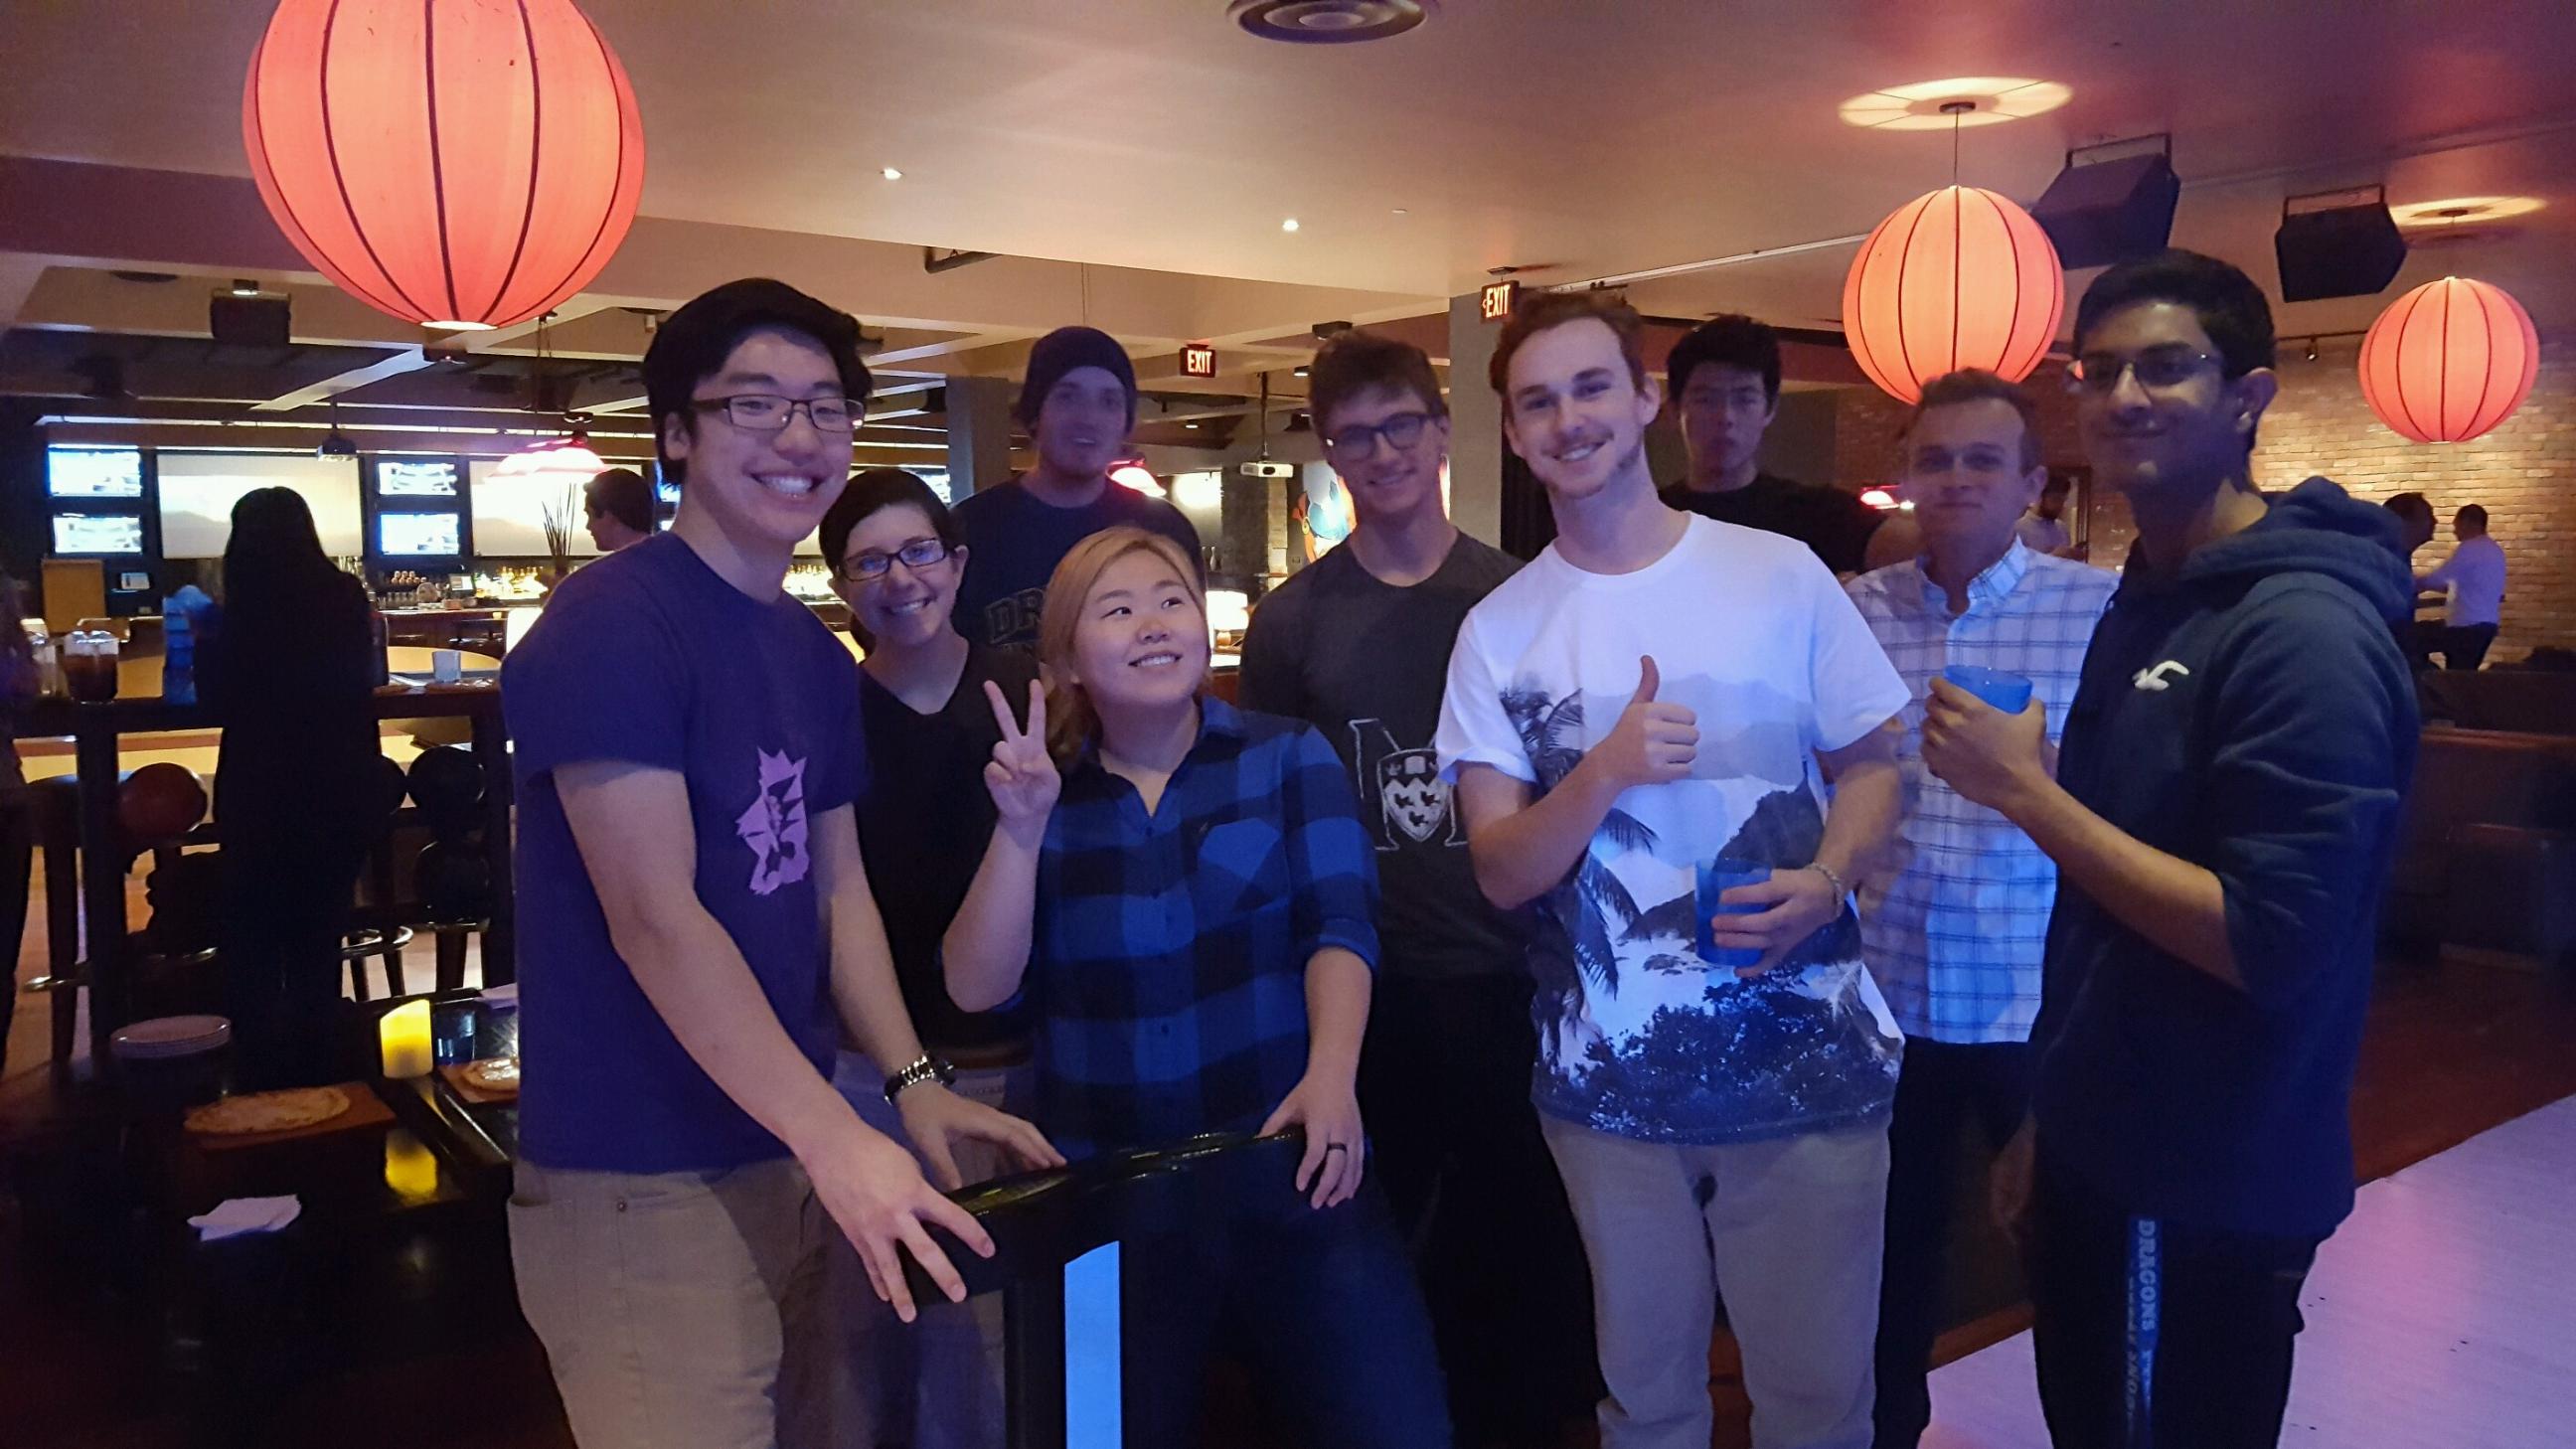 Students in a Bowling Alley